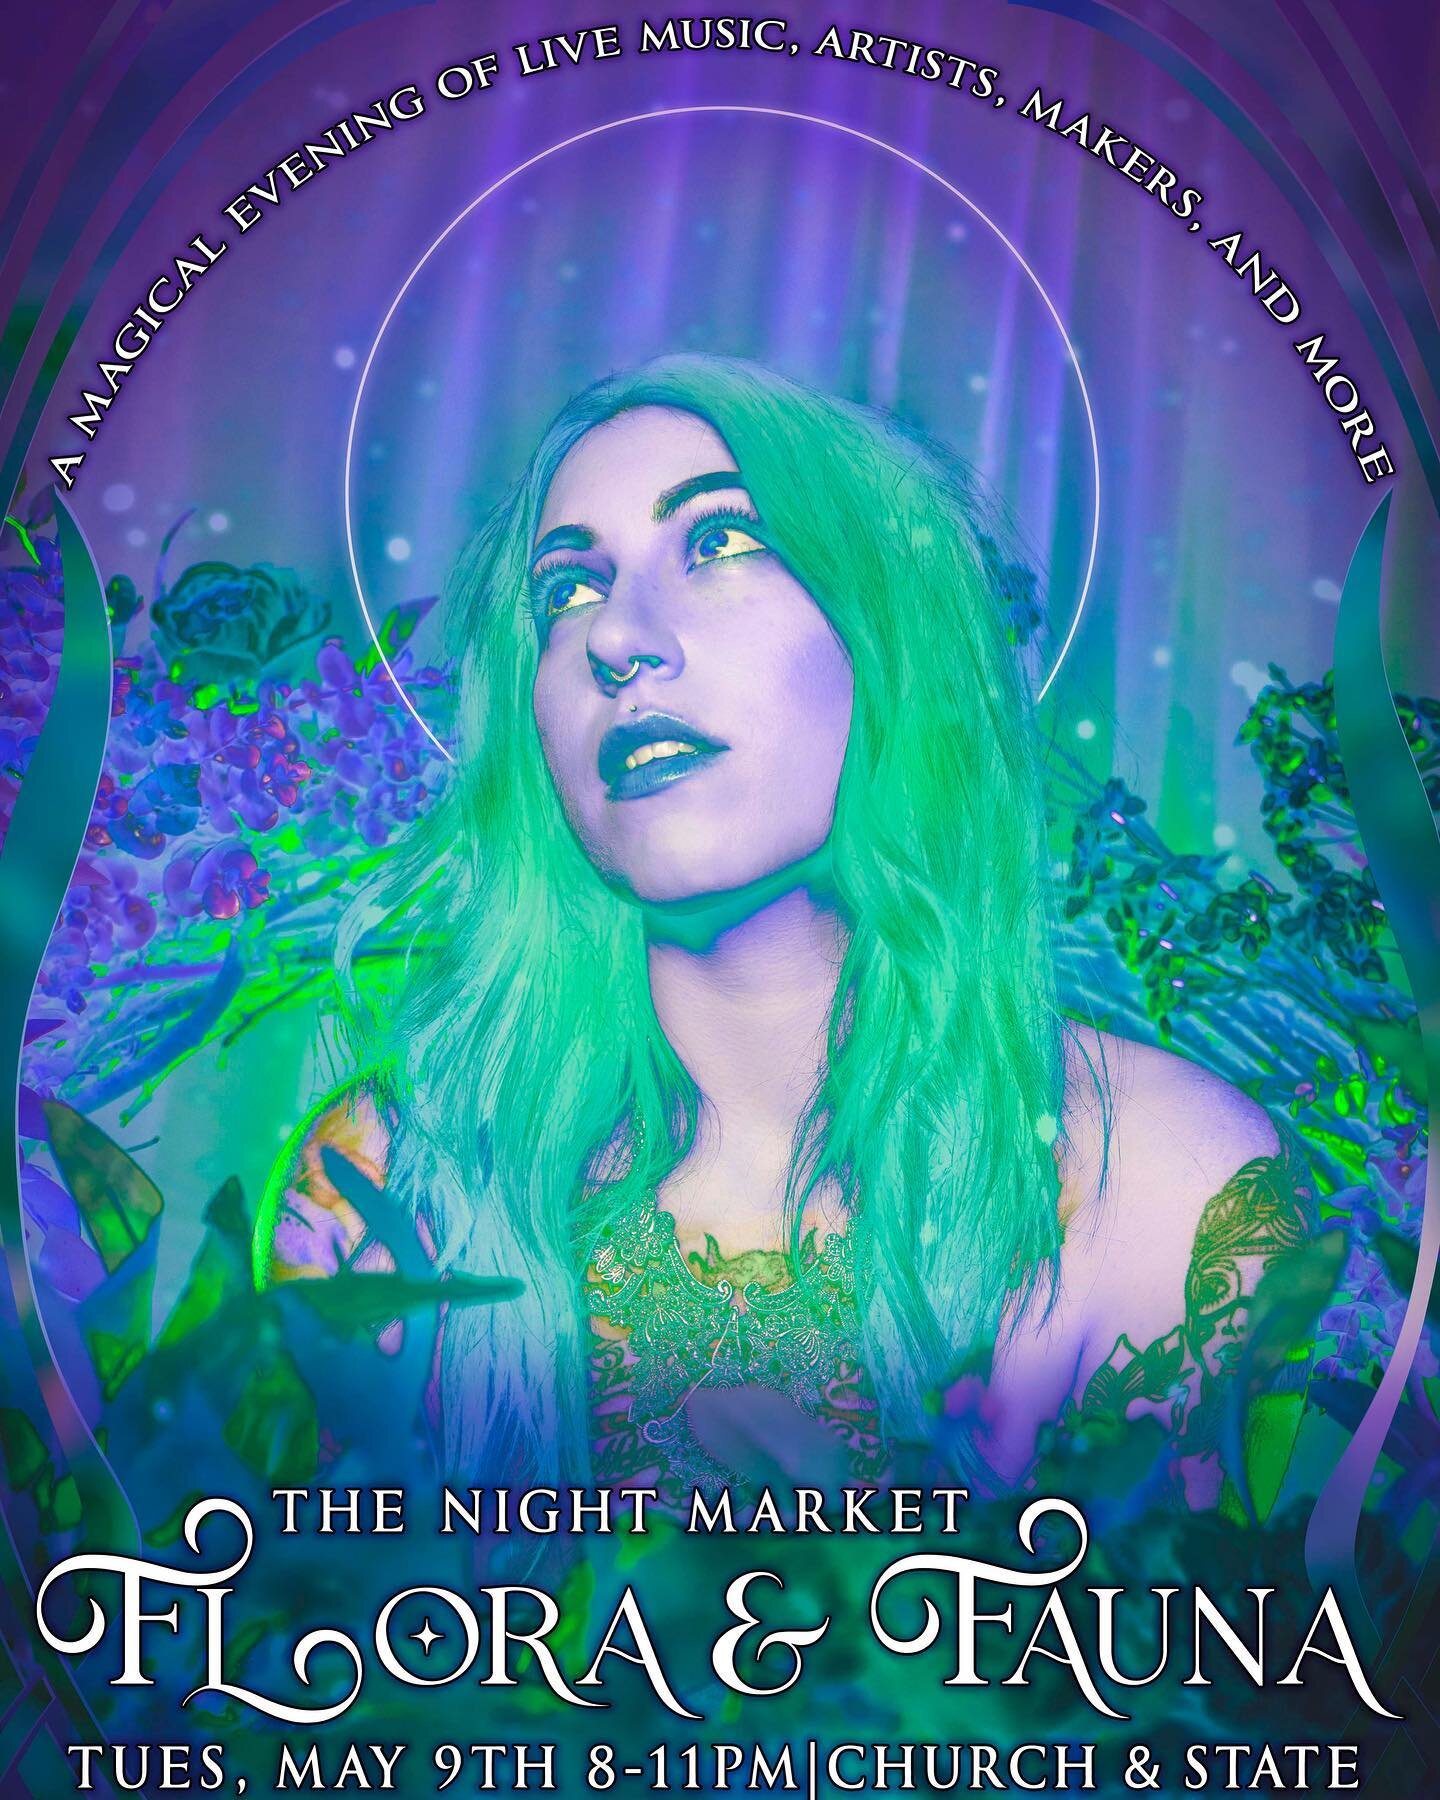 I will be a vendor at the @slclunatics Night Market this coming TUESDAY from 8-11pm! Only $3 entry free for a magical evening full of live music, artists, makers, tasty local food, and so much more!! The theme is flora &amp; fauna so come dressed in 